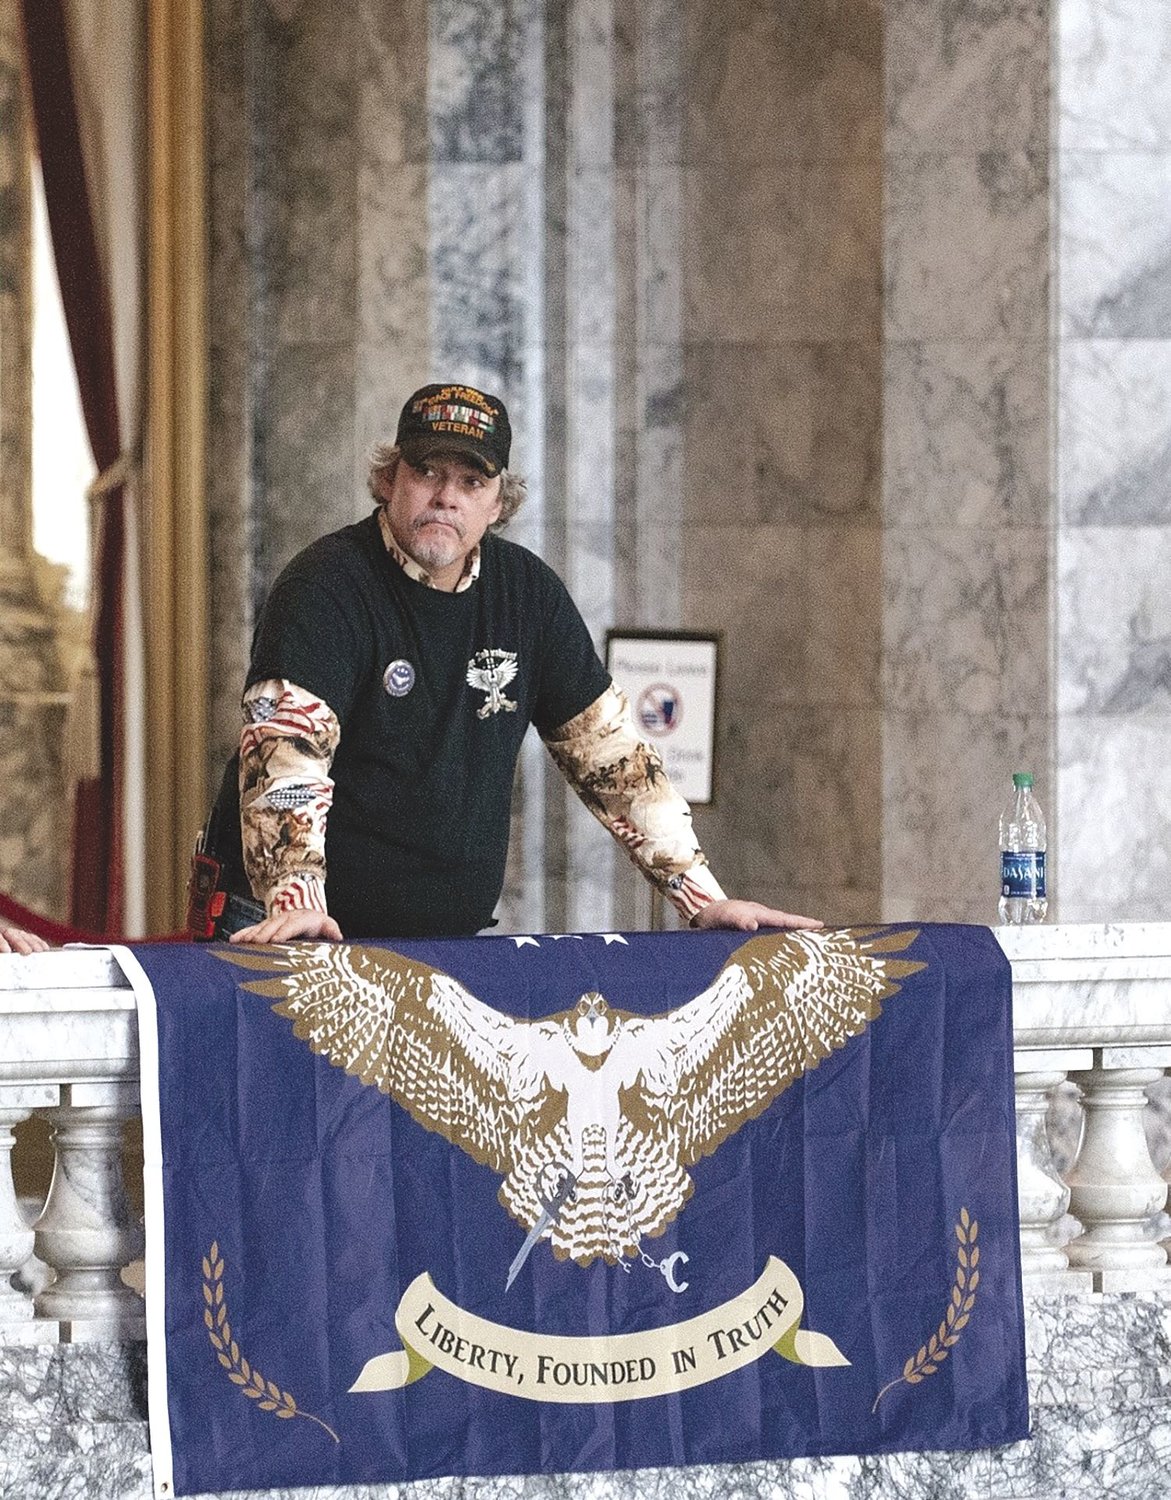 Robert Brown, an advocate for splitting the state of Washington into two, at a rally at the Capitol in Olympia last week.